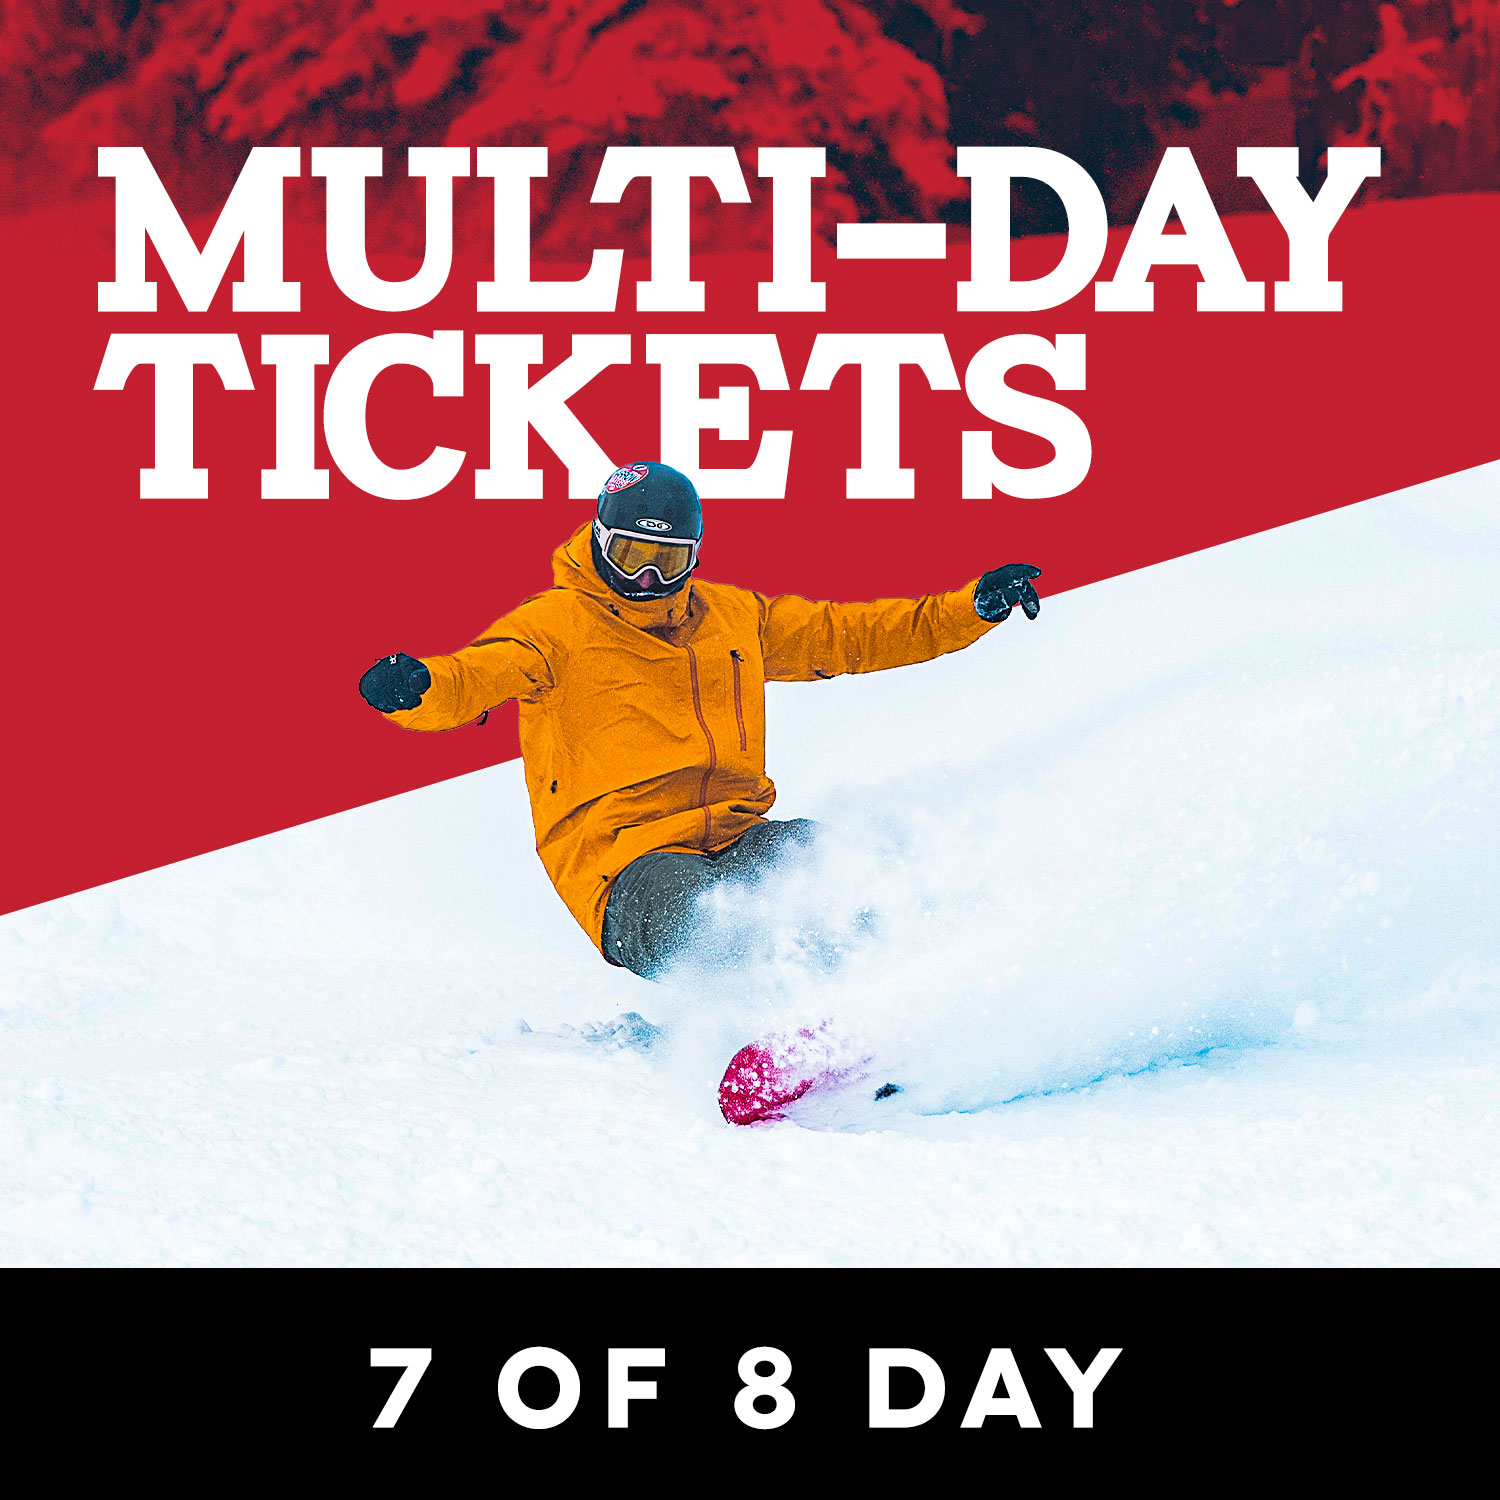 7 of 8 Day Ticket